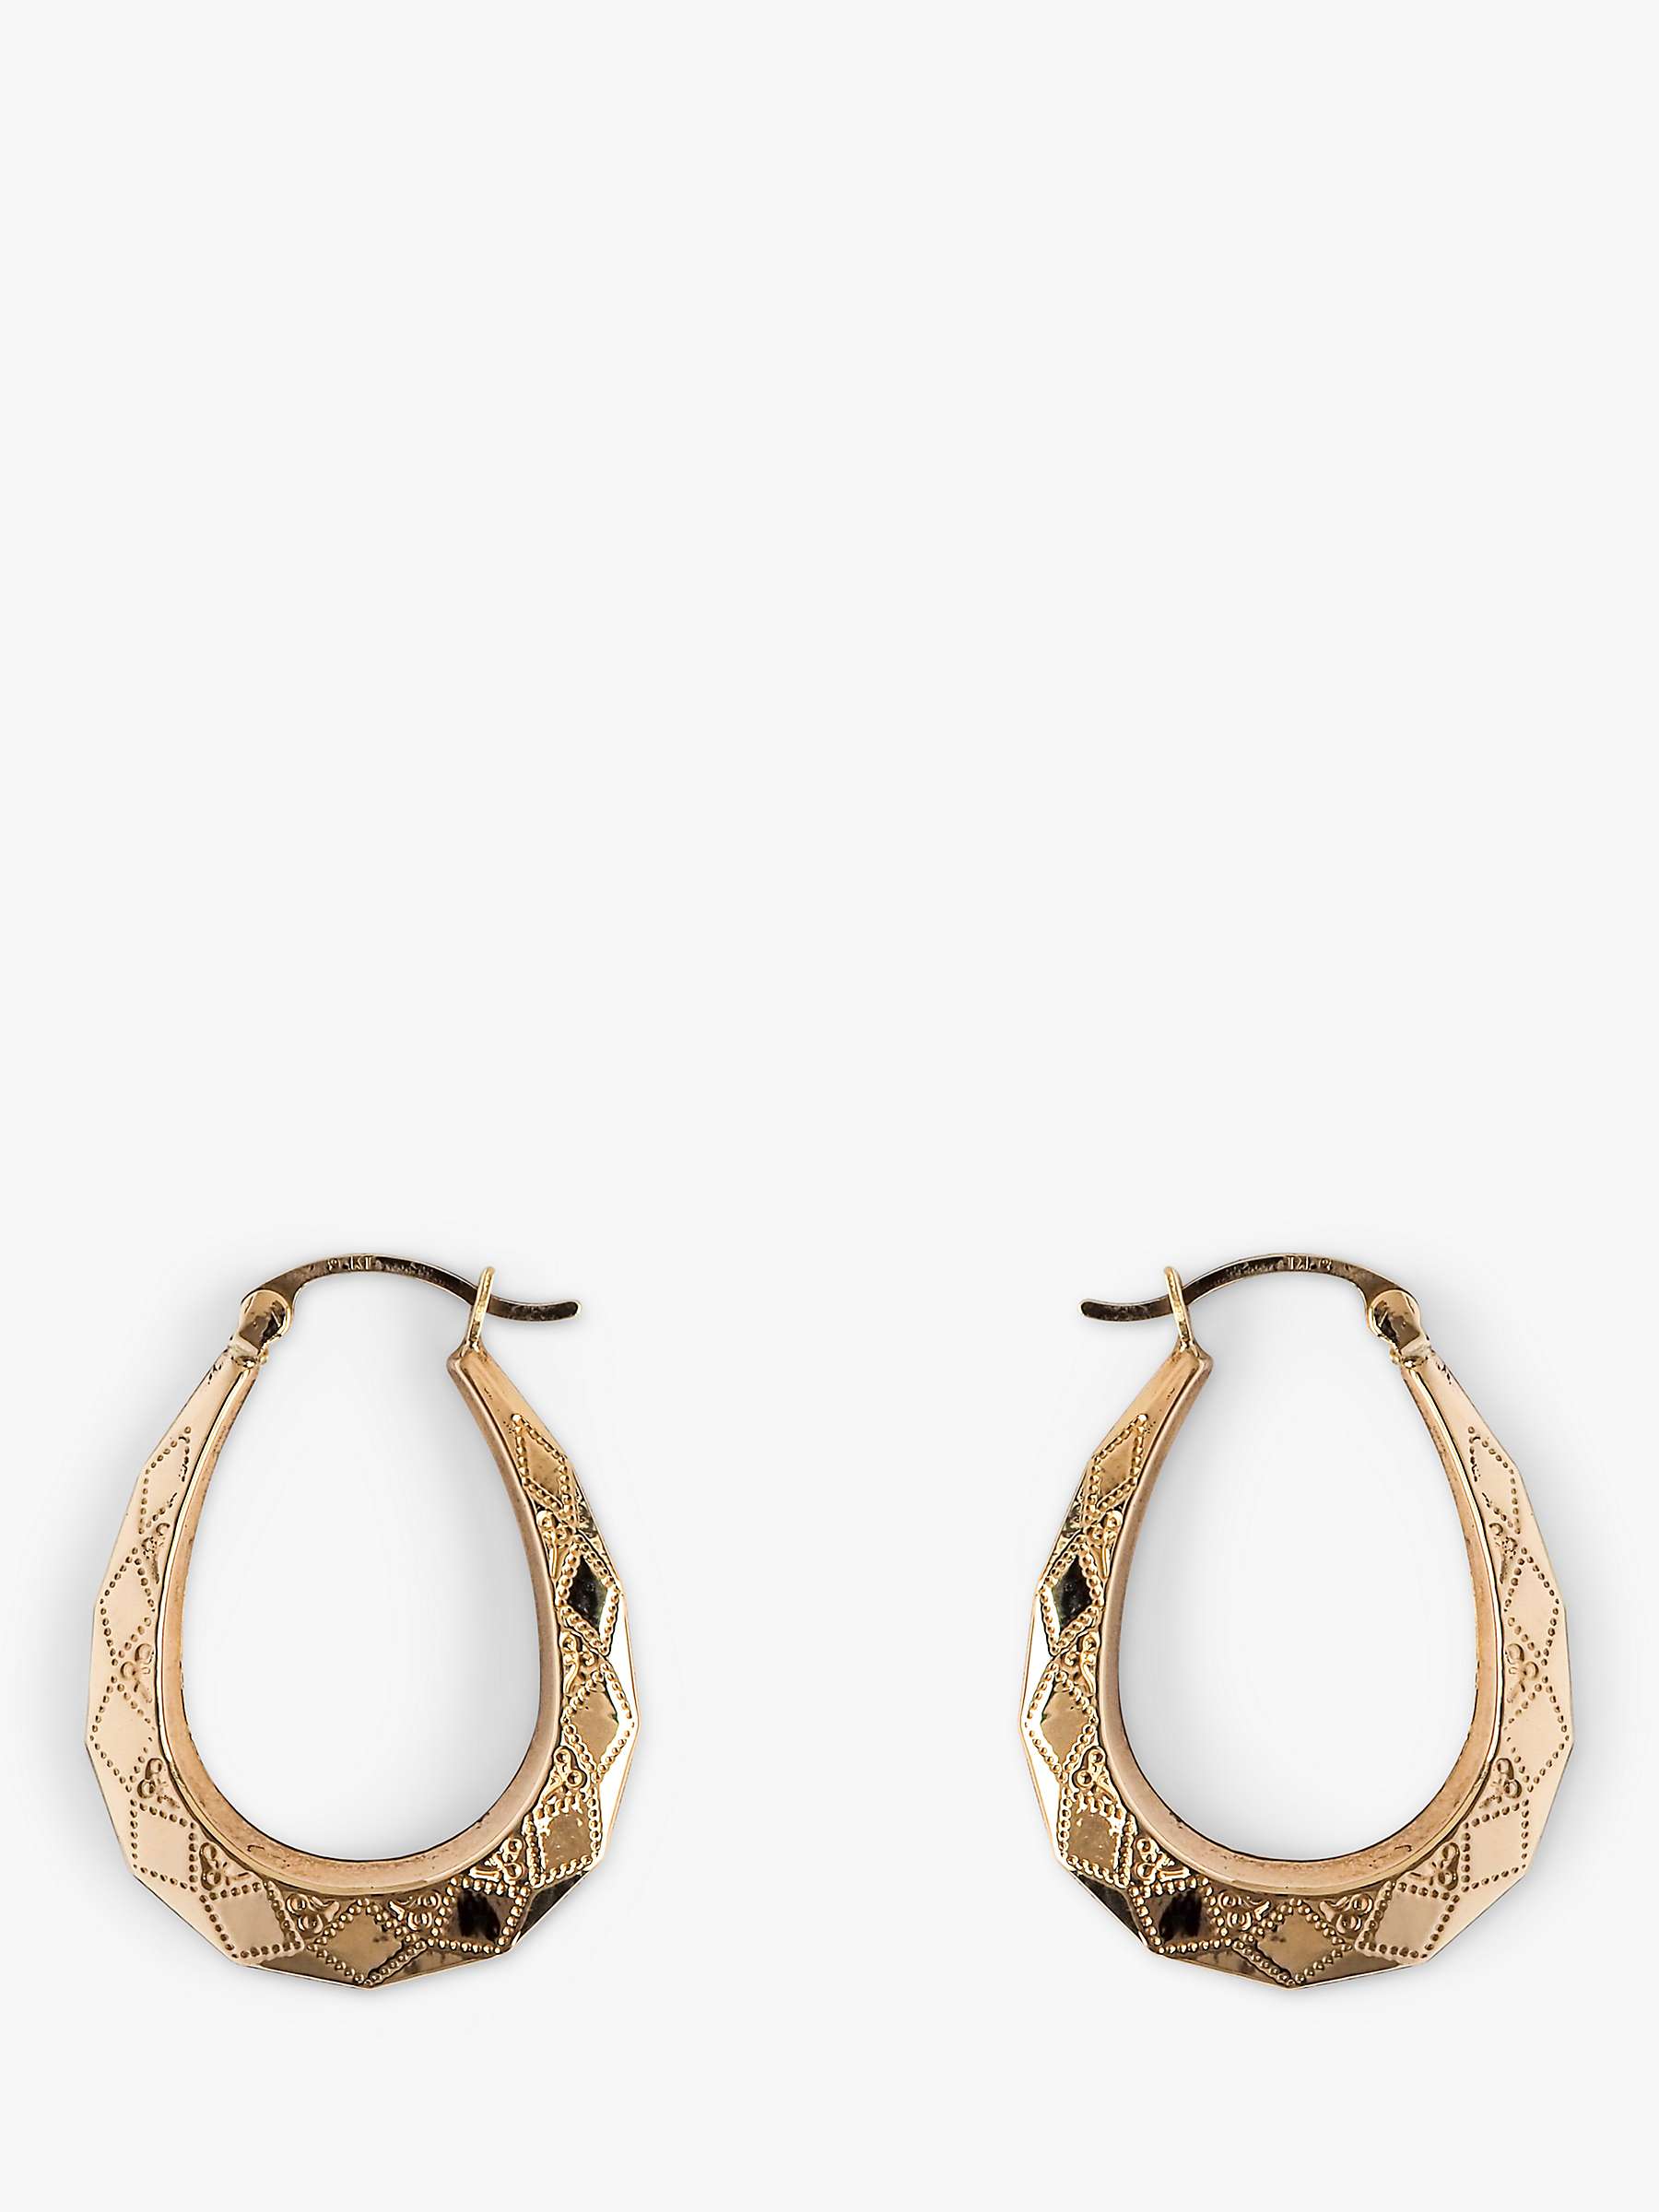 Buy L & T Heirlooms Second Hand 9ct Yellow Gold Engraved Diamond Creole Hoop Earrings, Gold Online at johnlewis.com